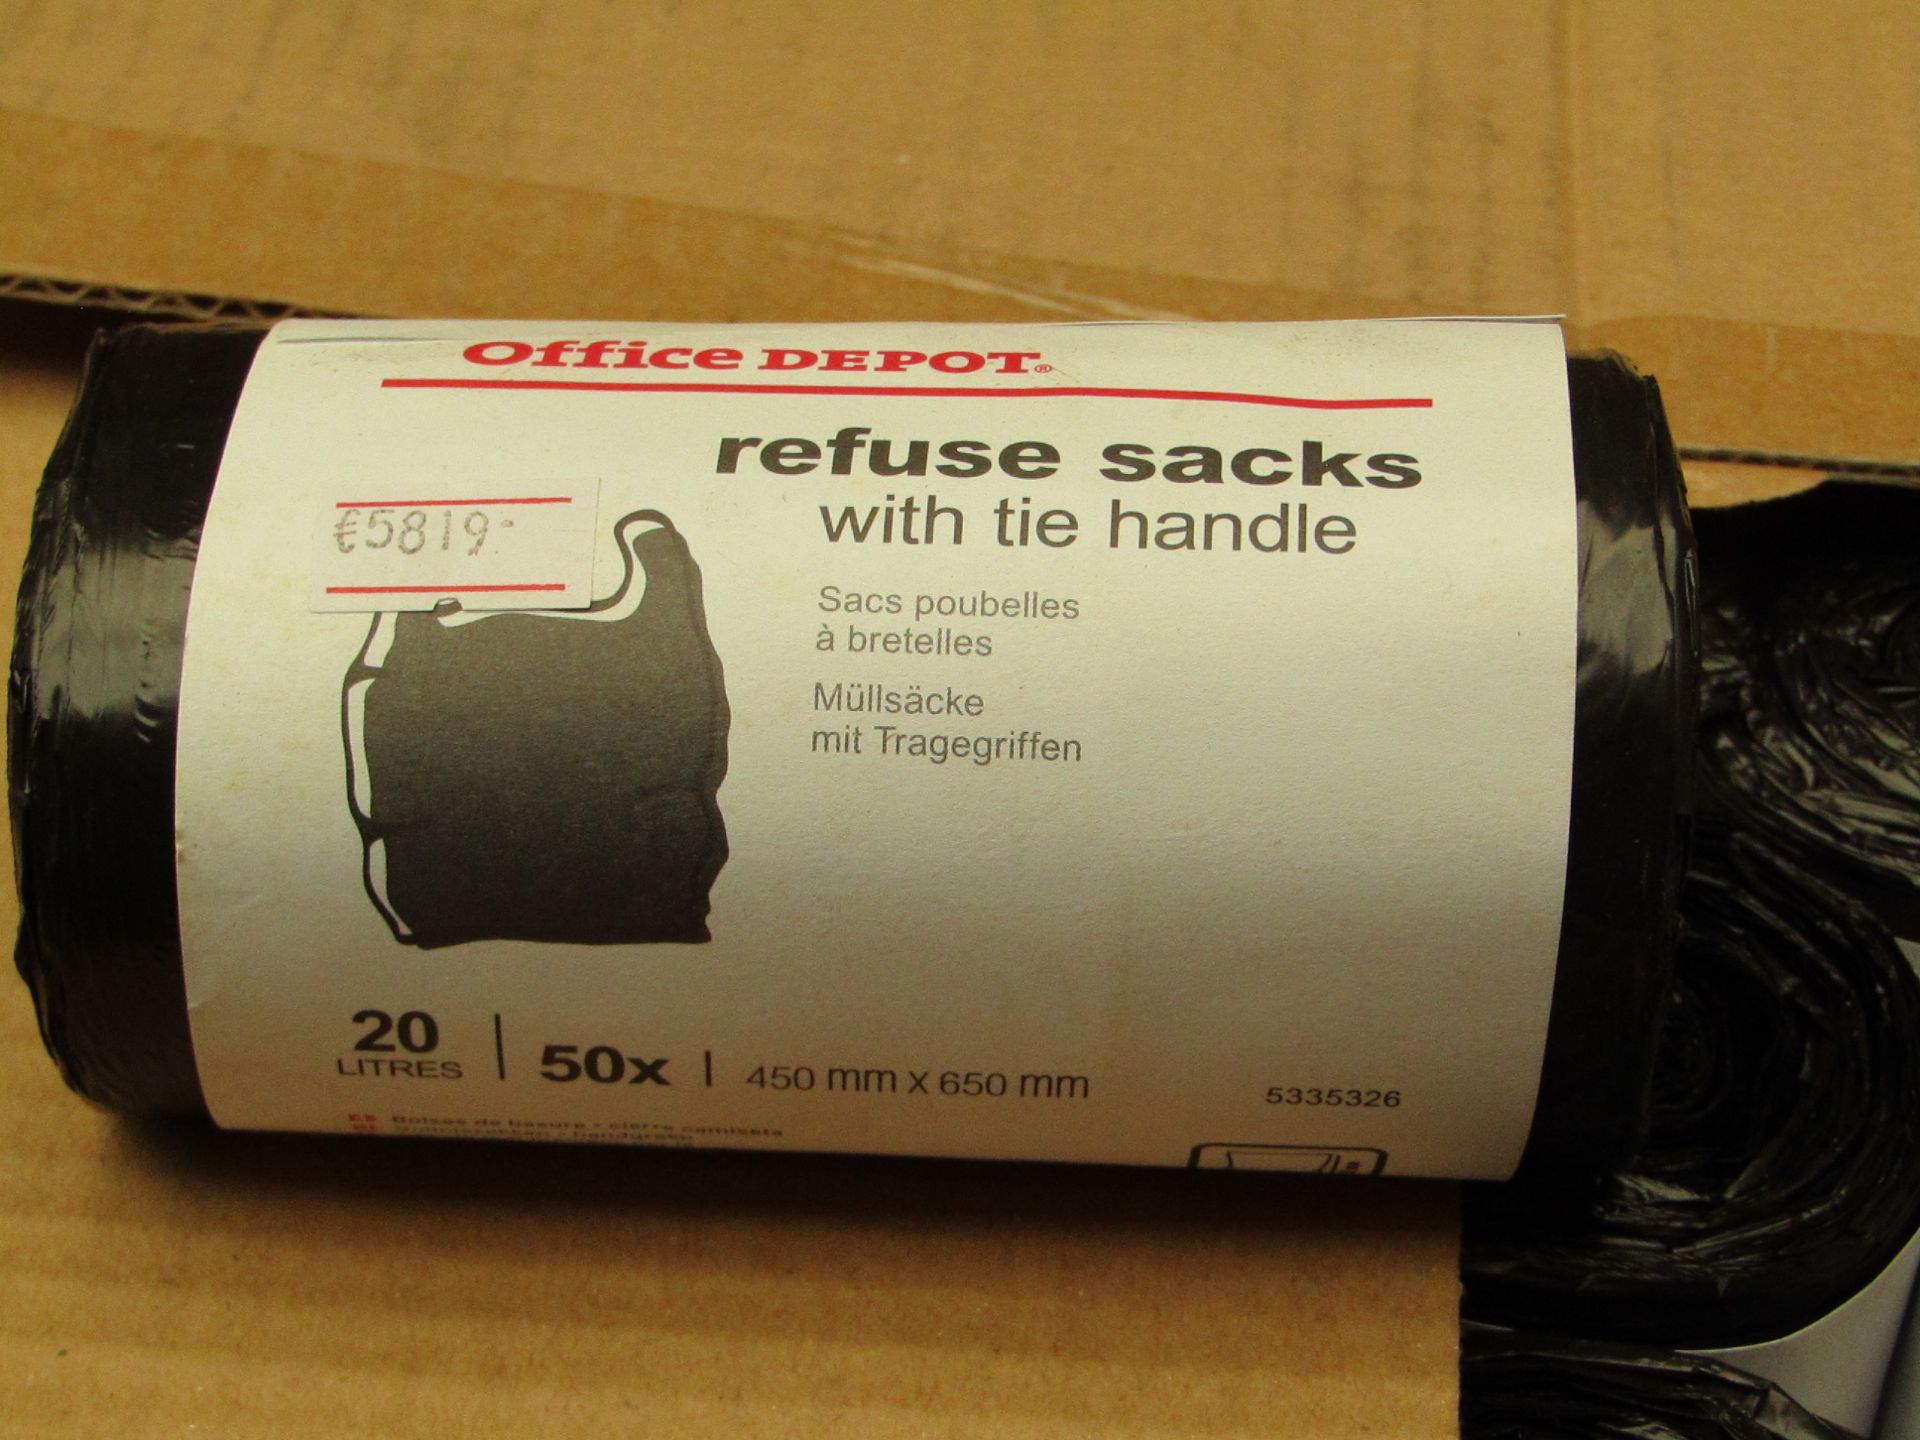 6x 20L Office Depot refuse sacks with tie handles, new and packaged.